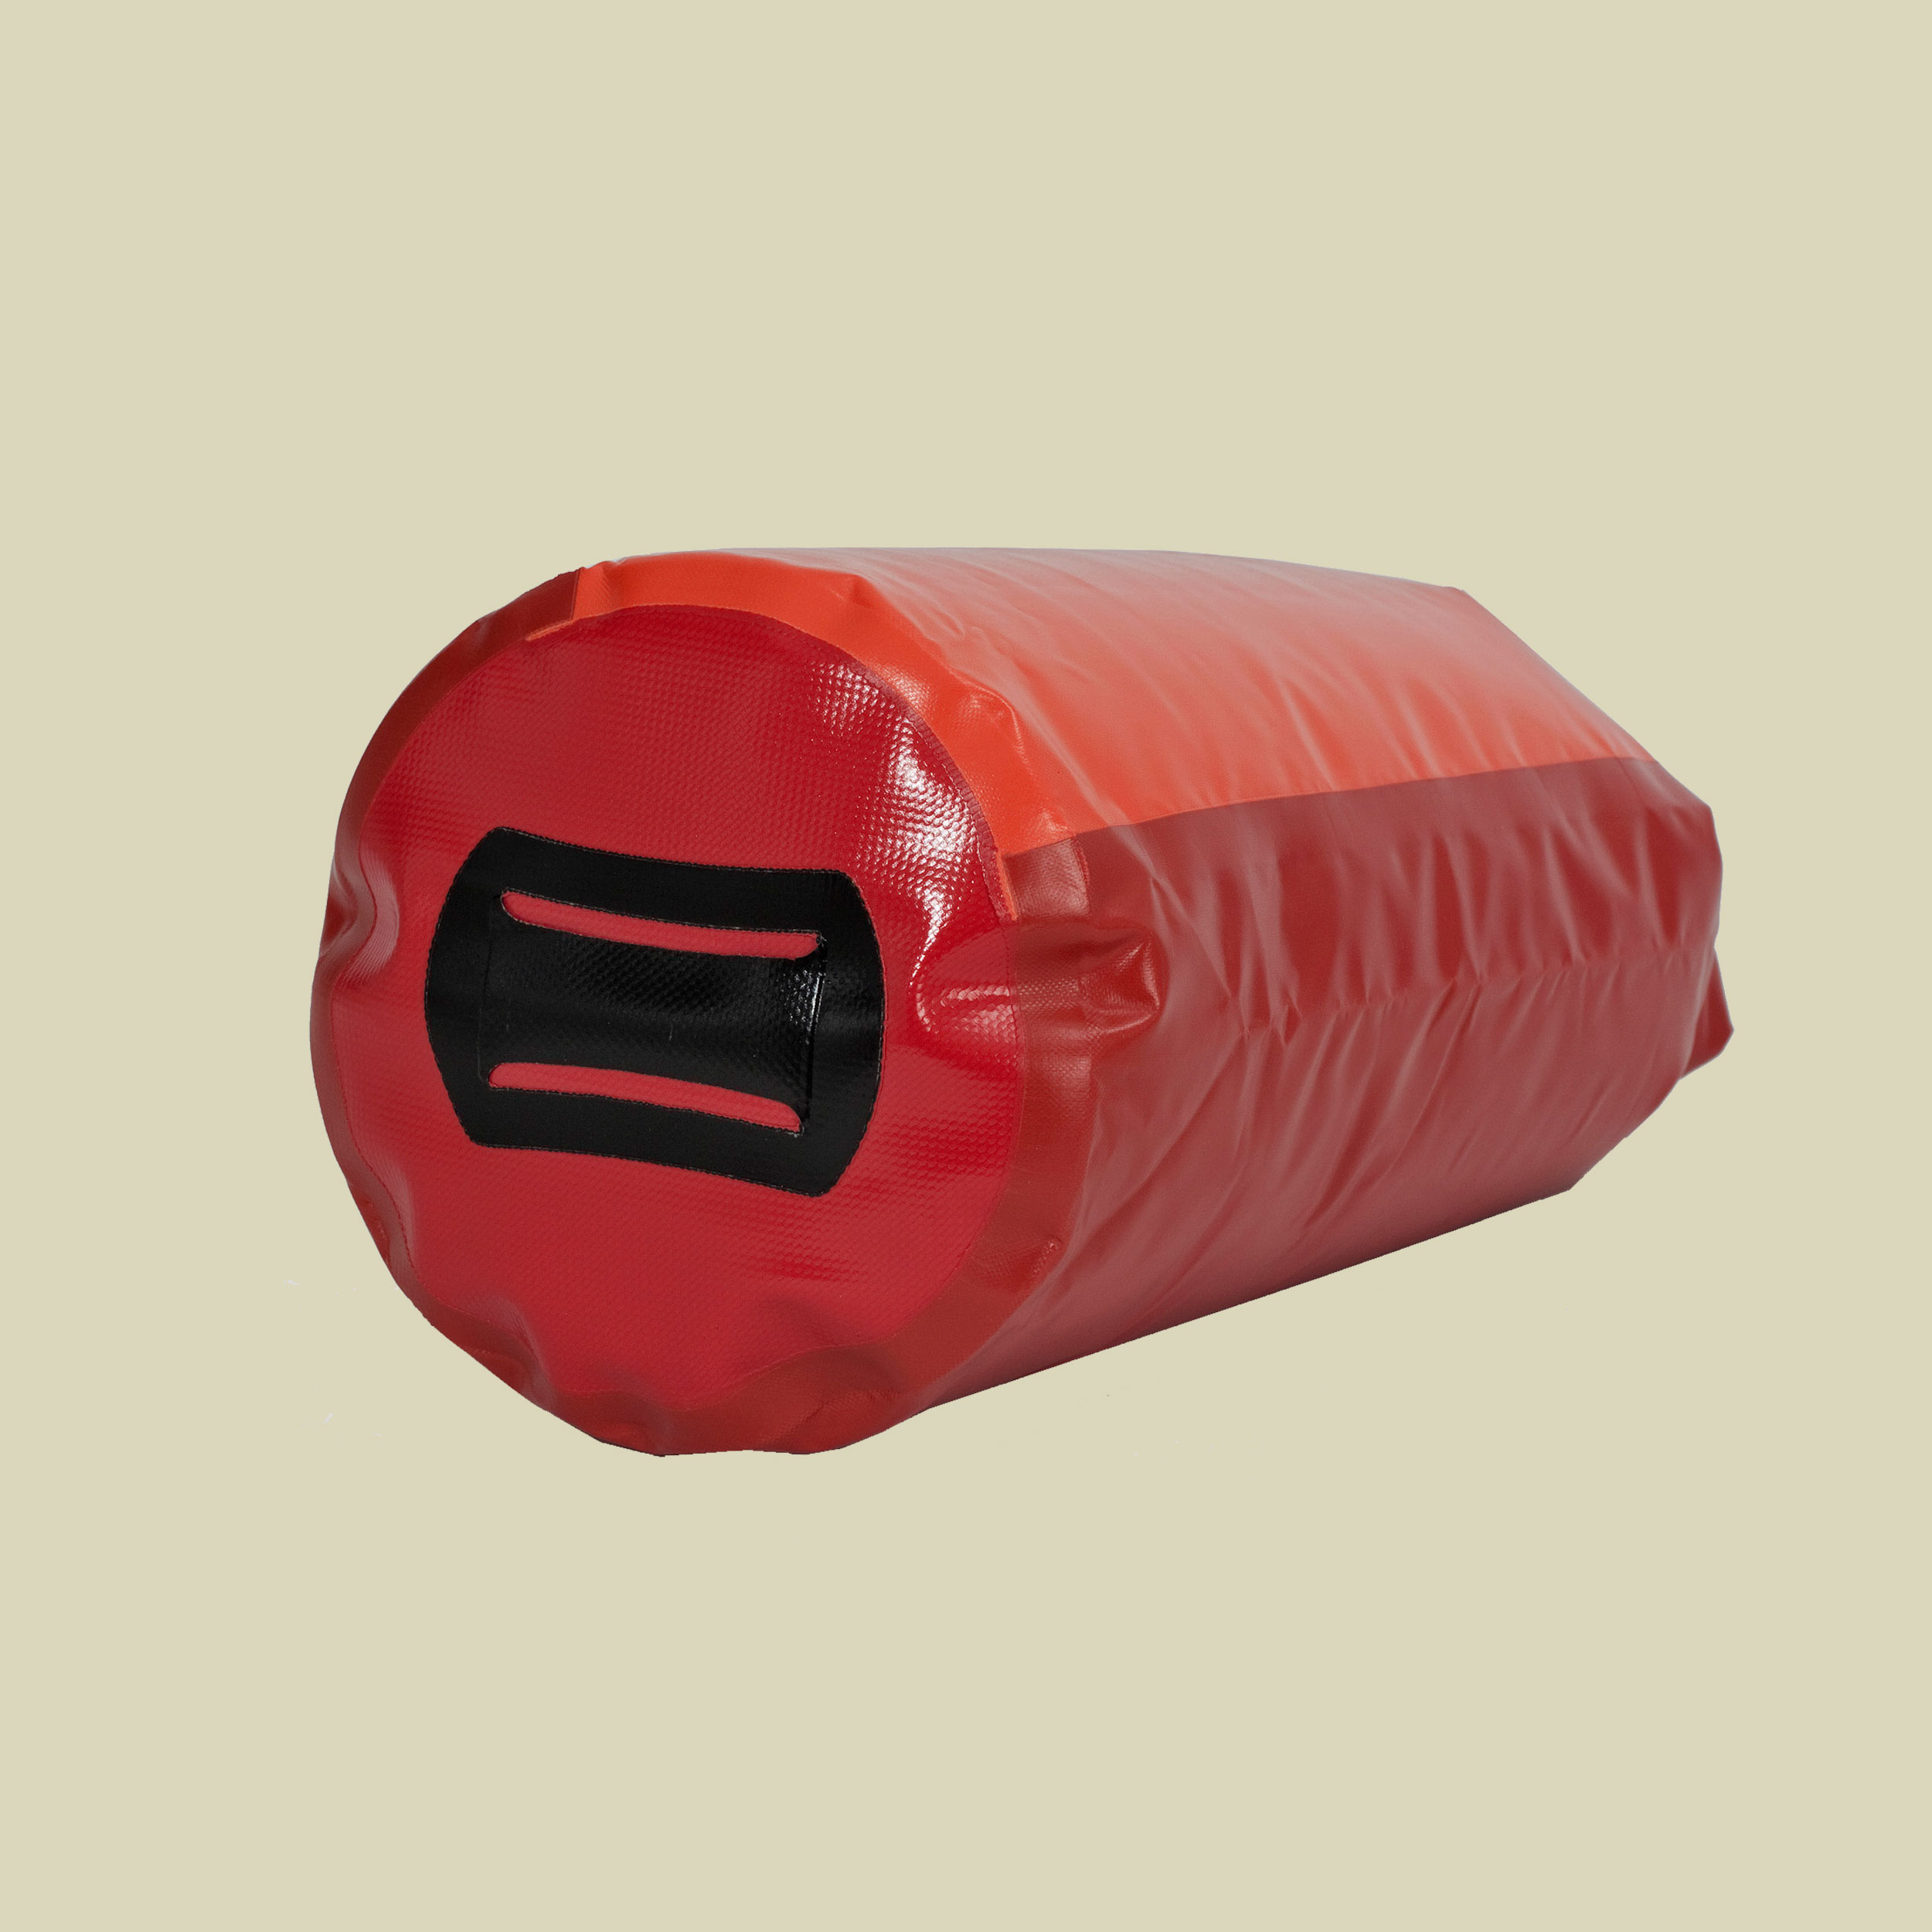 Dry-Bag PD 350 Volumen in Liter 22 Farbe cranberry-signalrot